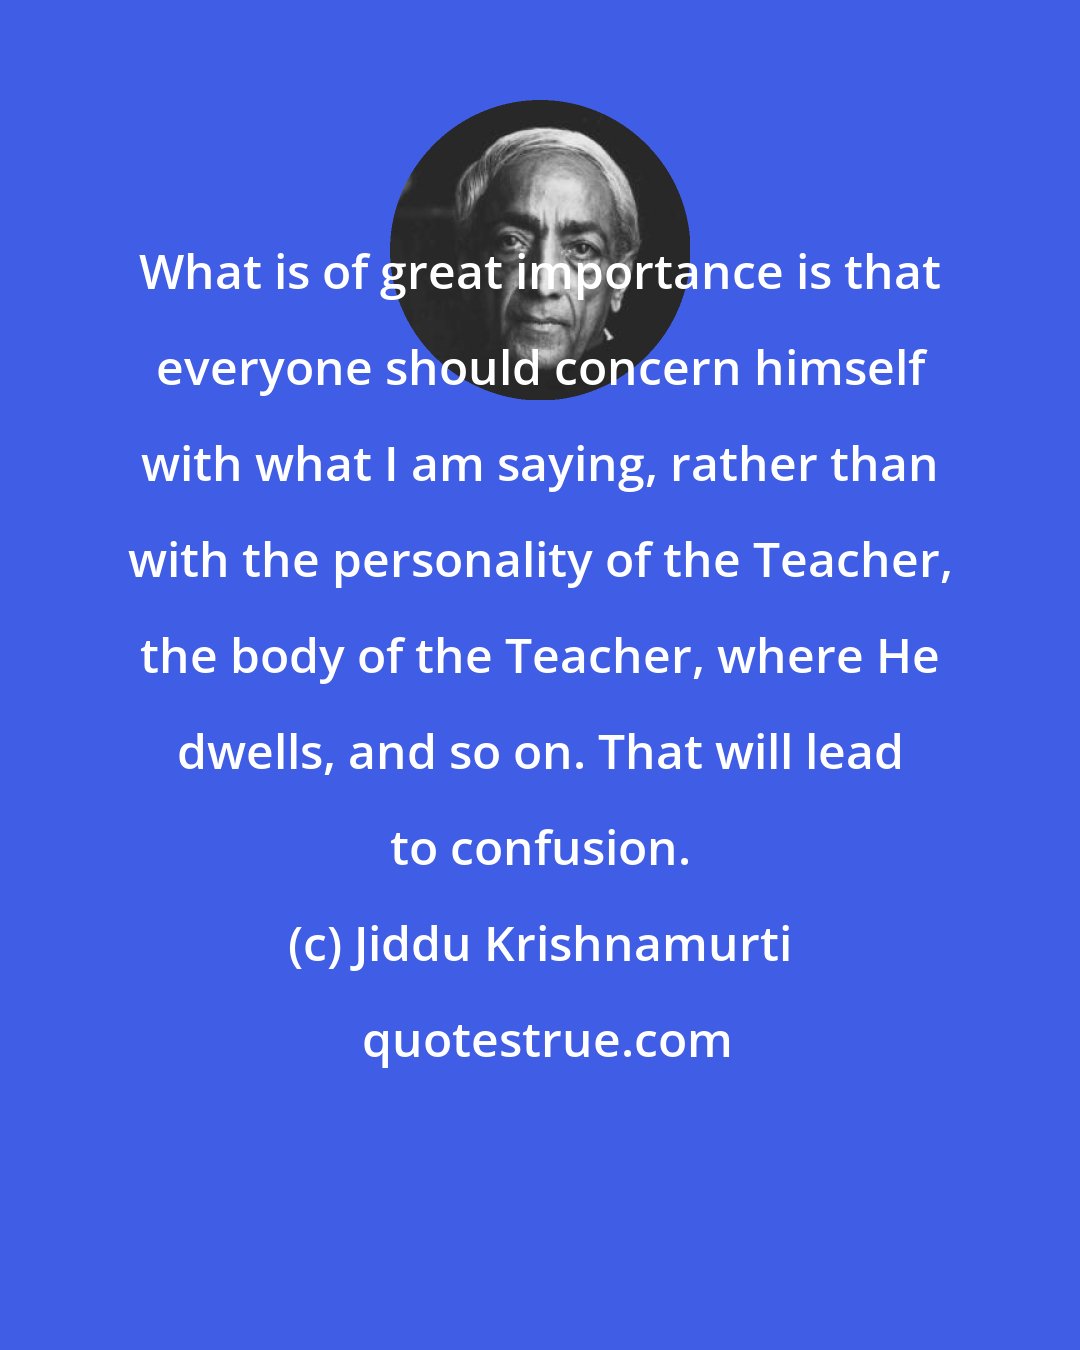 Jiddu Krishnamurti: What is of great importance is that everyone should concern himself with what I am saying, rather than with the personality of the Teacher, the body of the Teacher, where He dwells, and so on. That will lead to confusion.